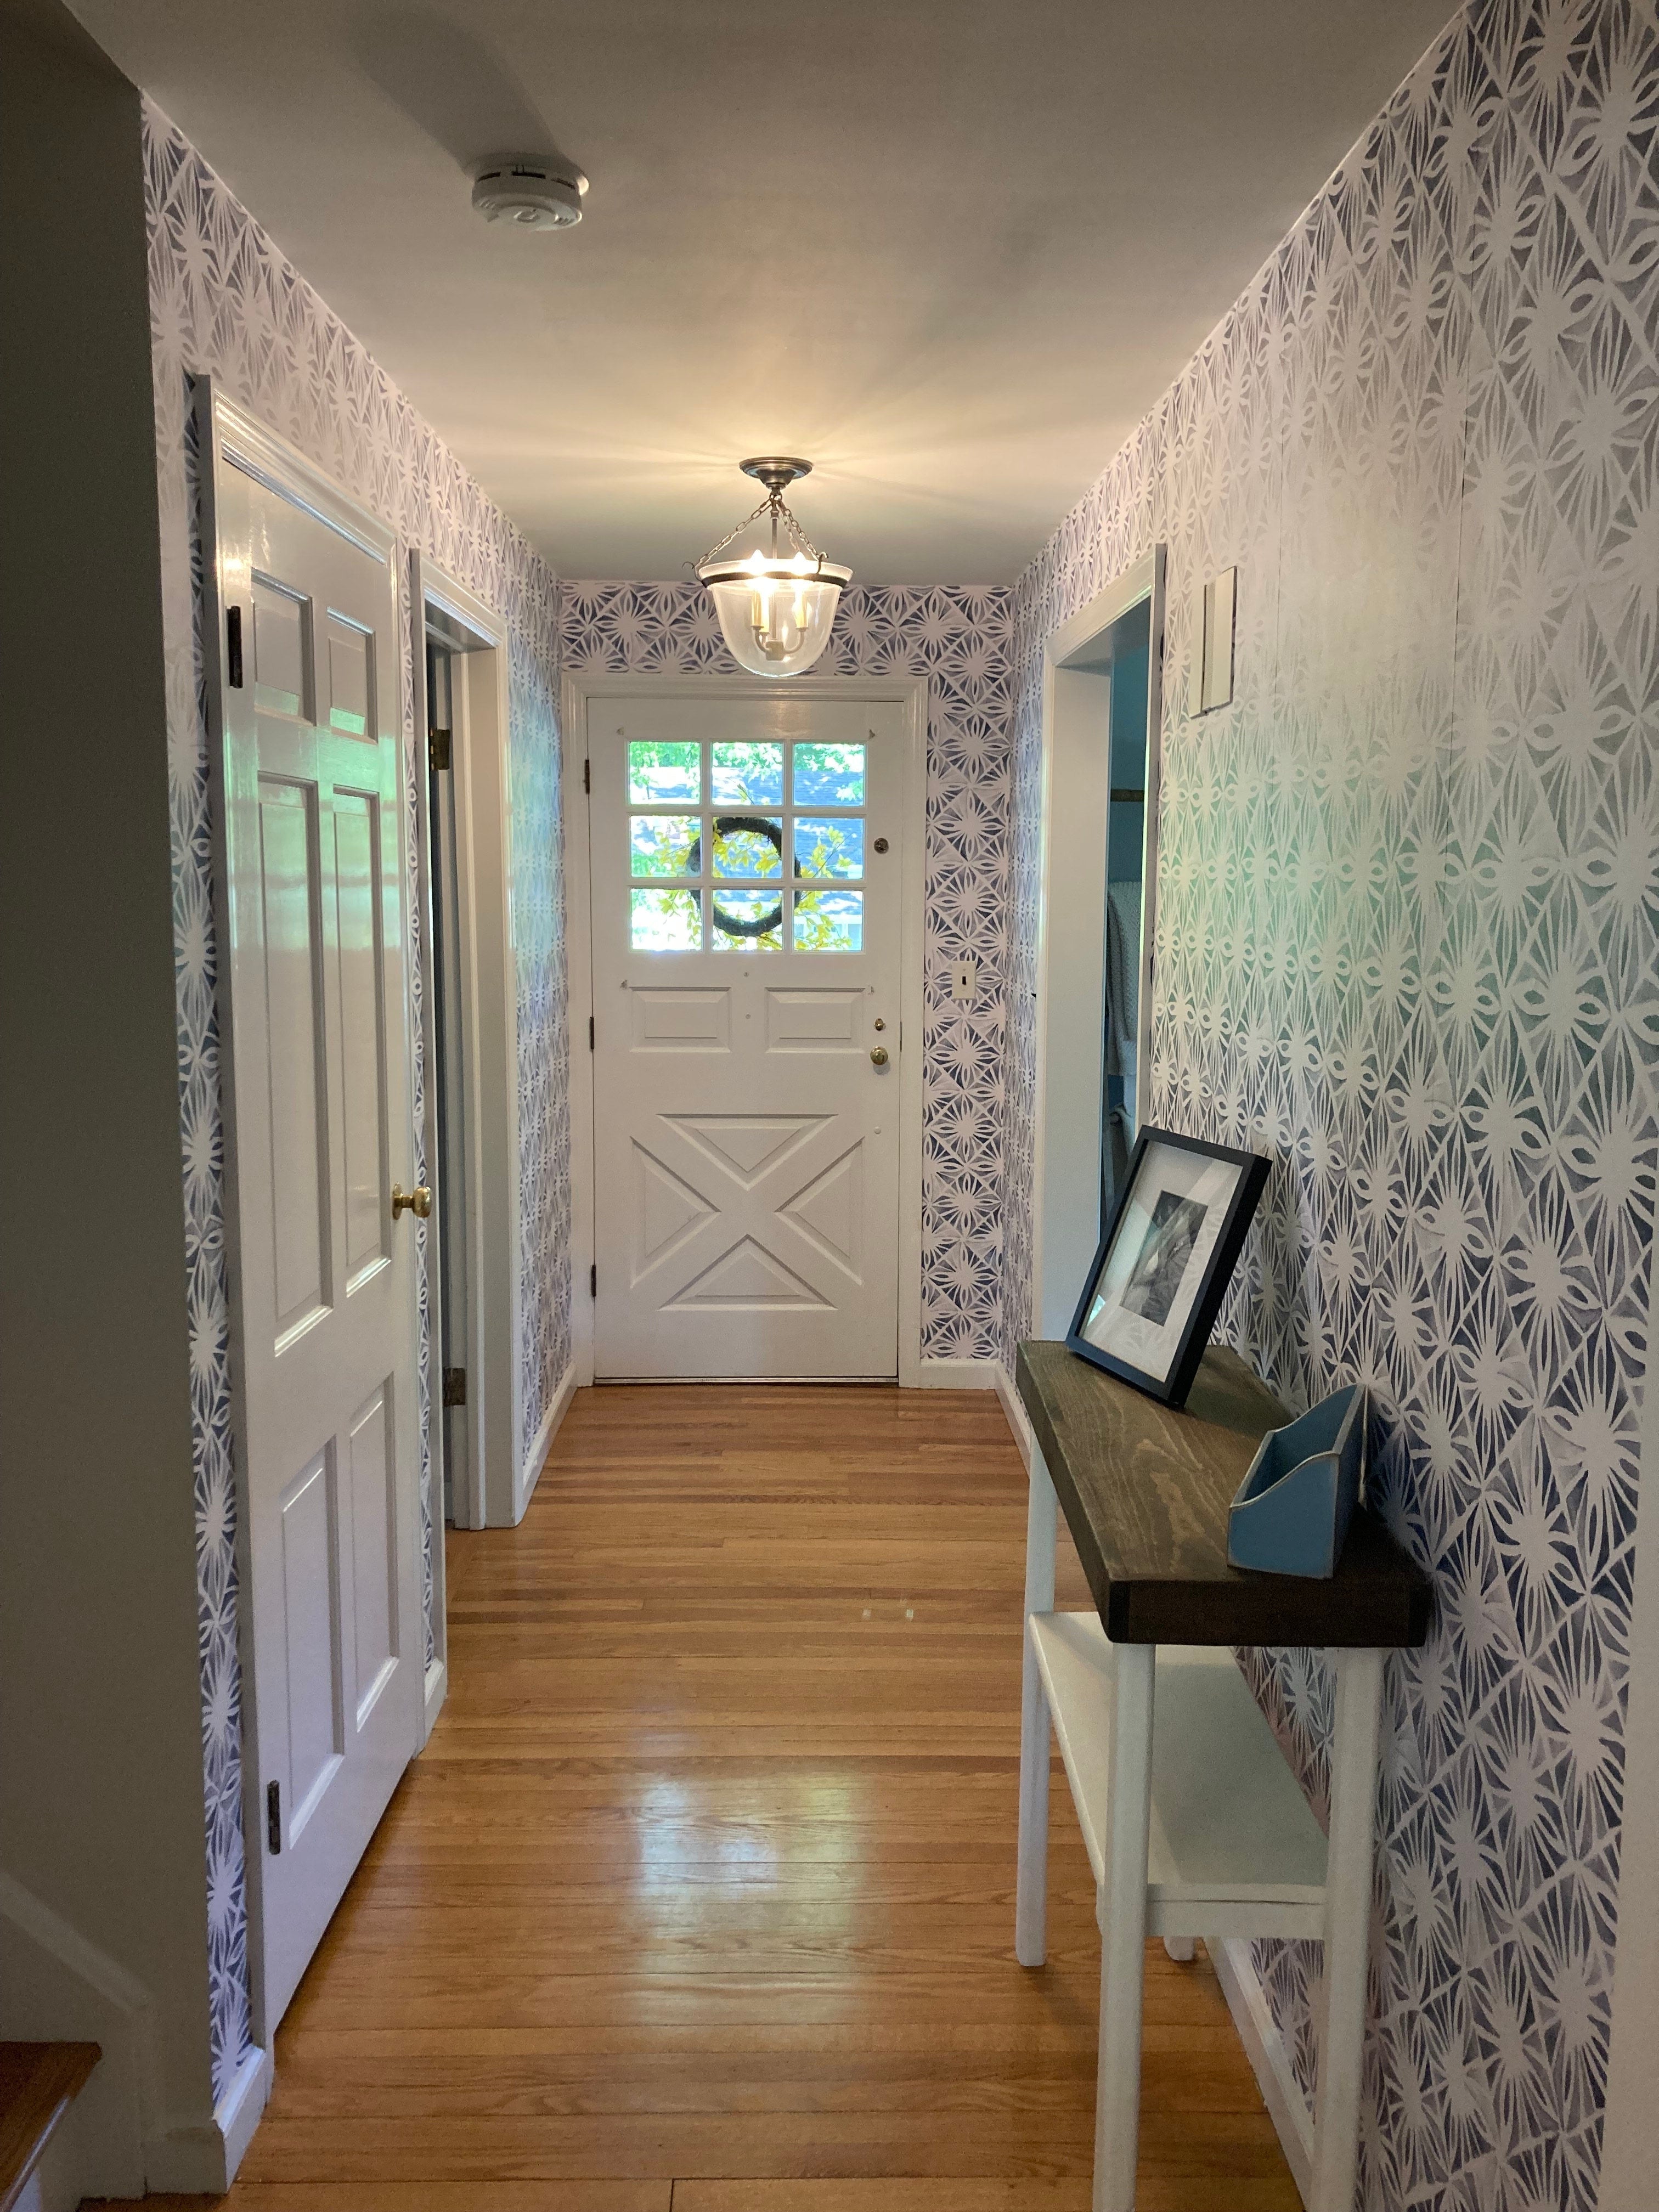 From Dull to Dazzling: Wallpaper Ideas for Hallways and Entryways